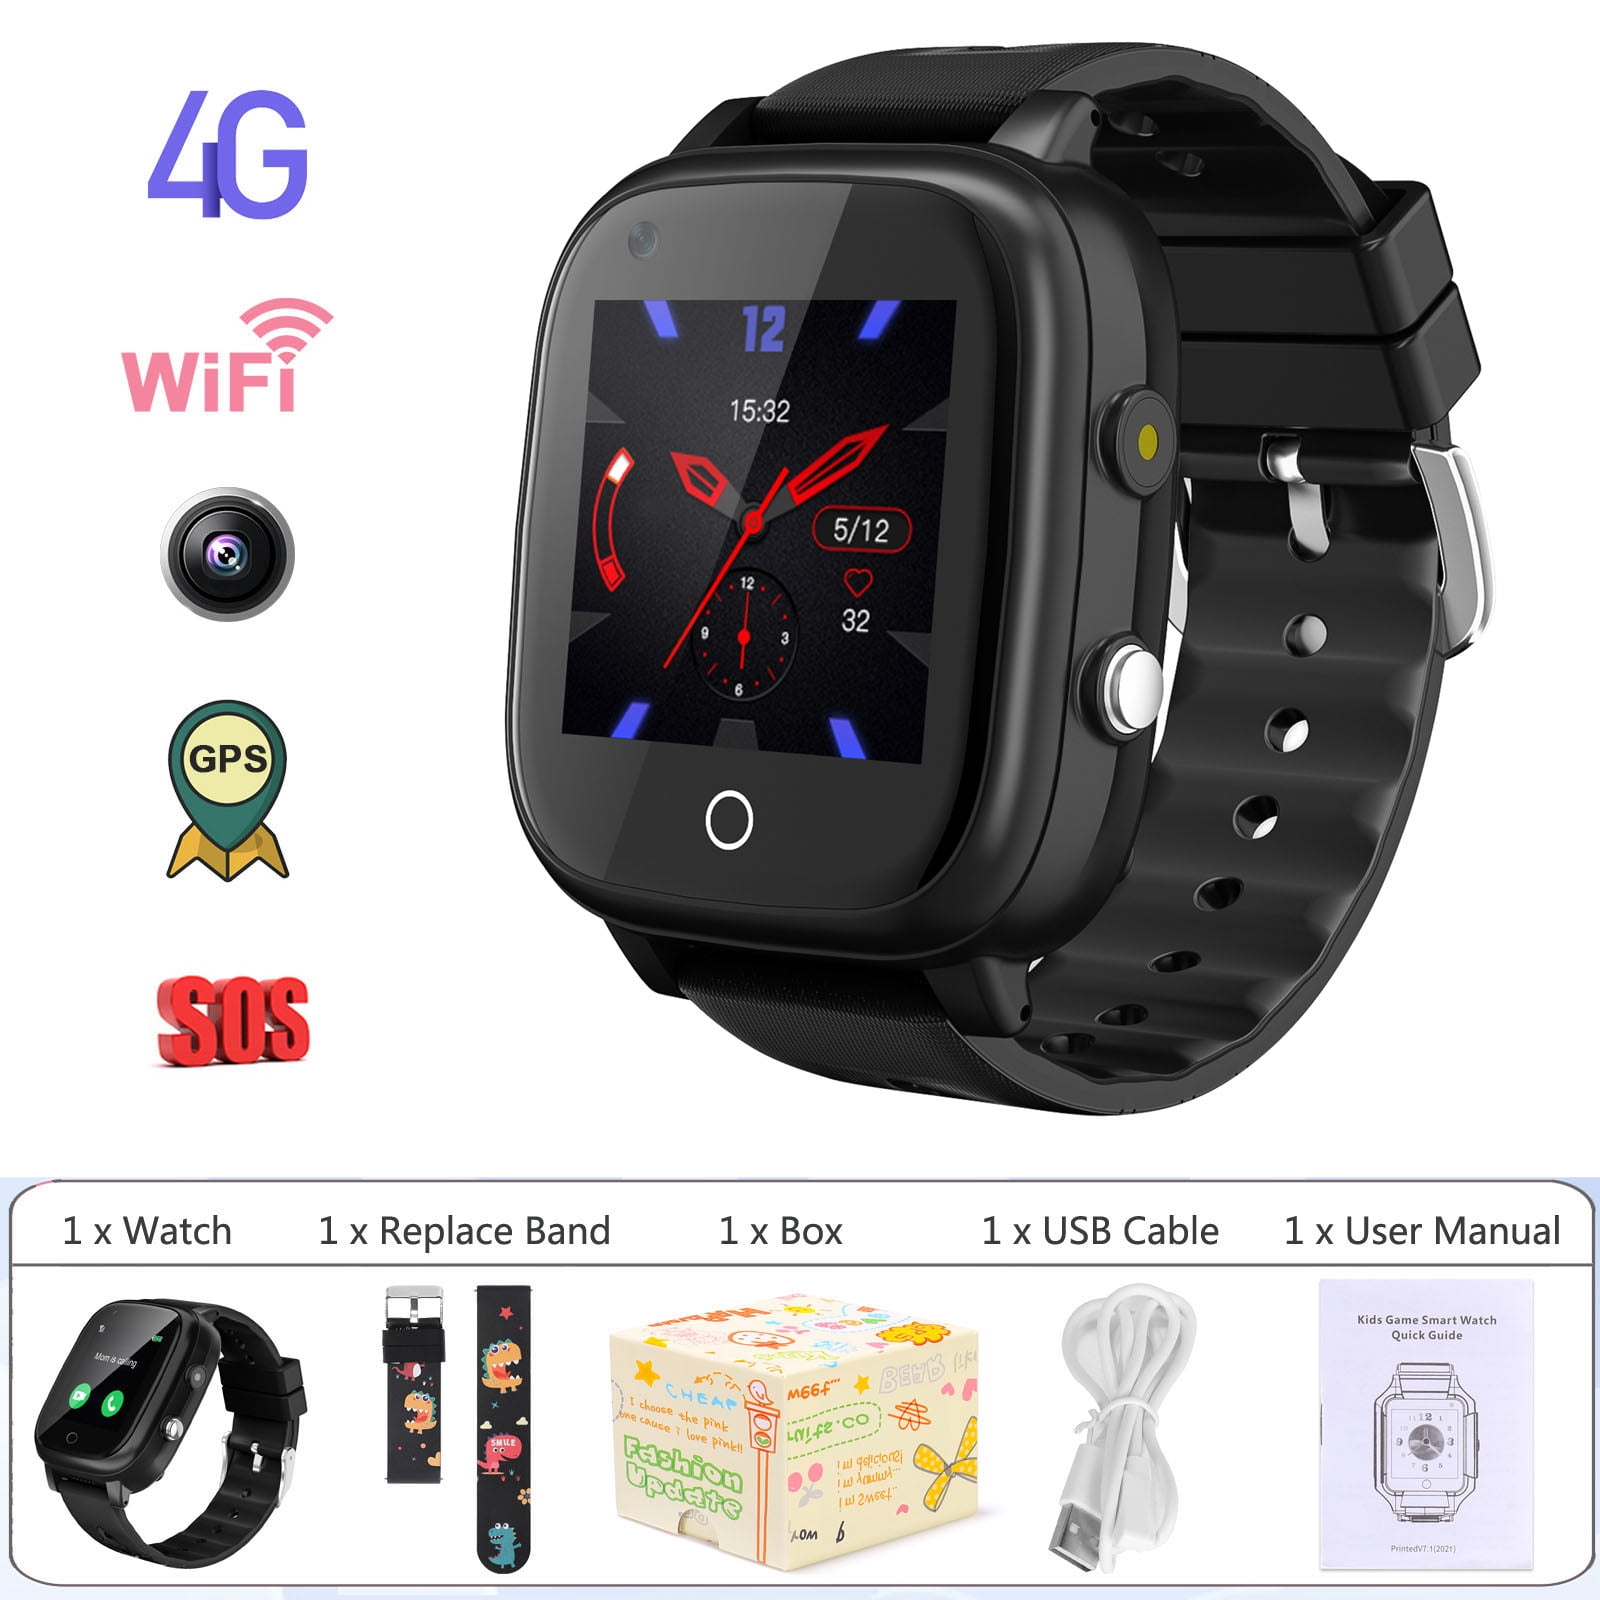 Topchances T5 Waterproof GPS Smart Watch for Kids, 4G Wifi Video Phone Call Camera SOS Alarm Geo-Fence Touch Screen Monitoring Health Steps Anti-Lost GPS Tracker Watches For Android IOS, Pink